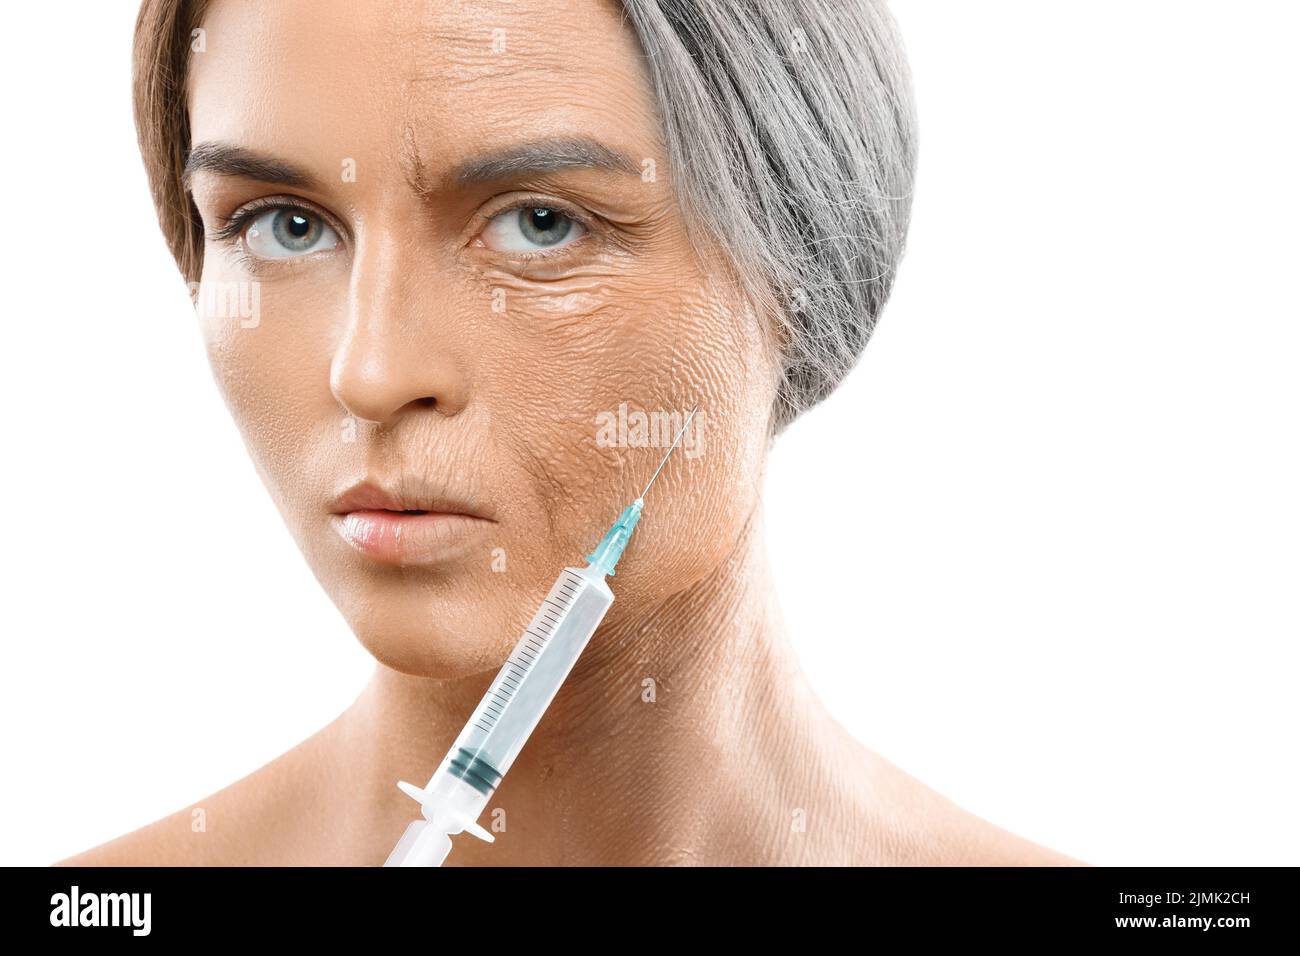 Young and old face comparison. Woman with syringe. Stock Photo